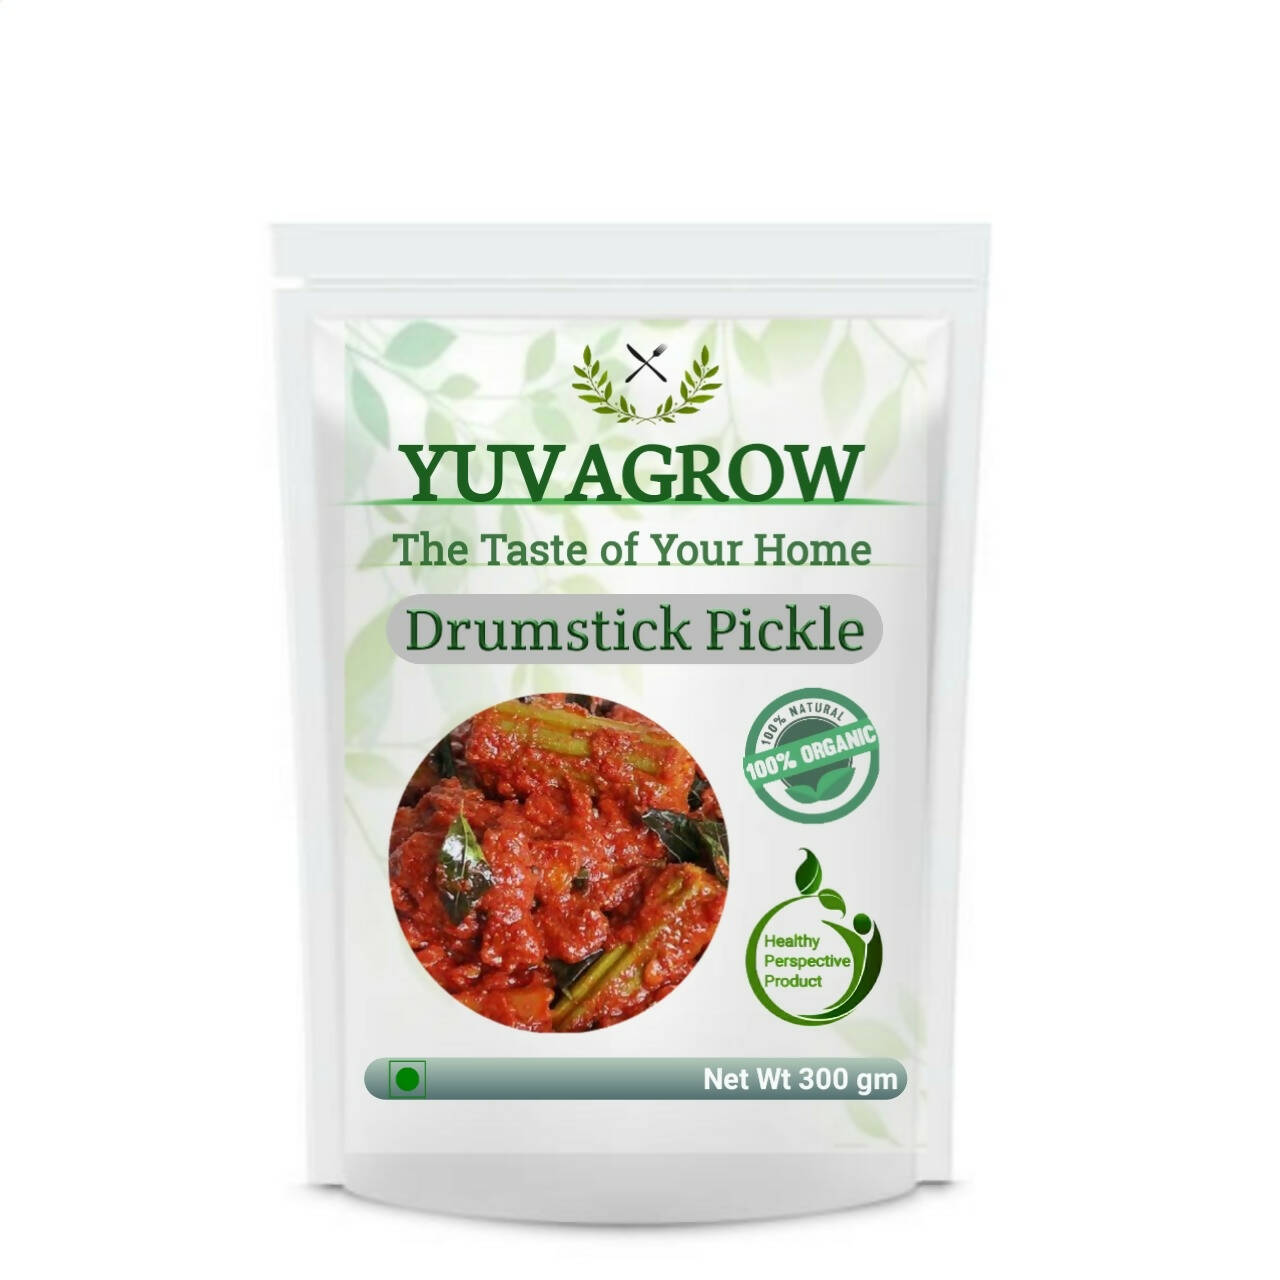 Yuvagrow Drumstick Pickle - buy in USA, Australia, Canada